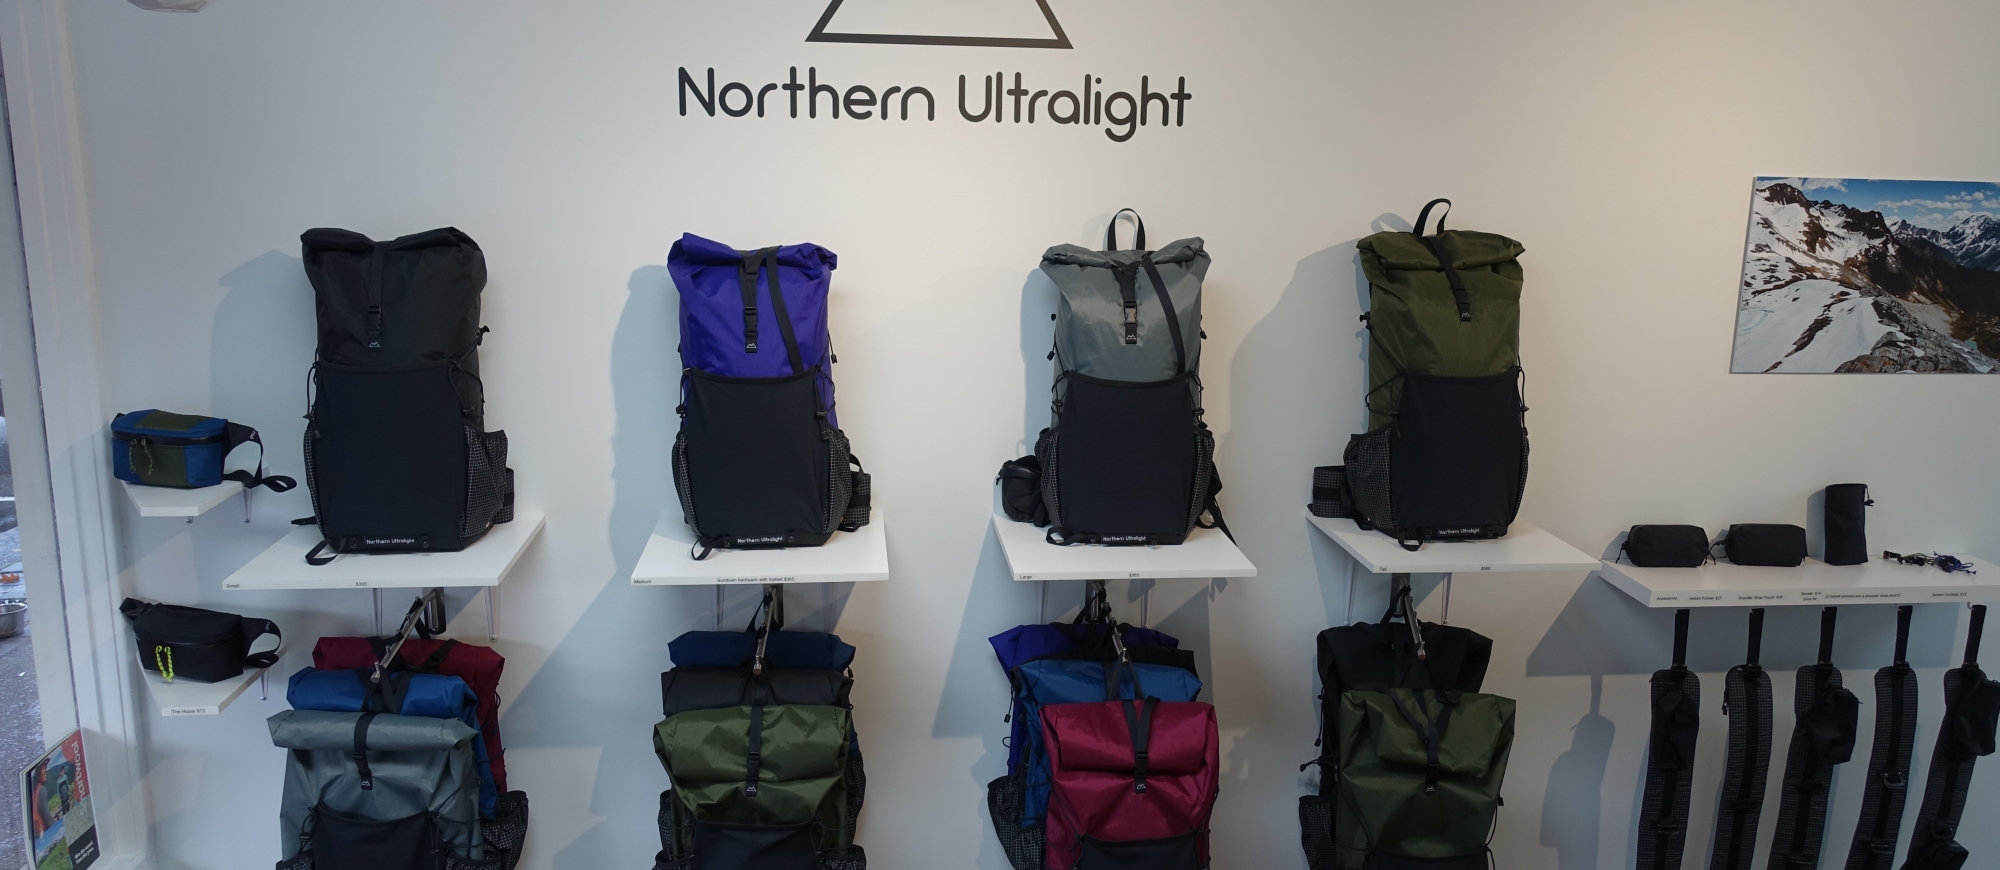 Northern Ultralight products on a backlit display shelf